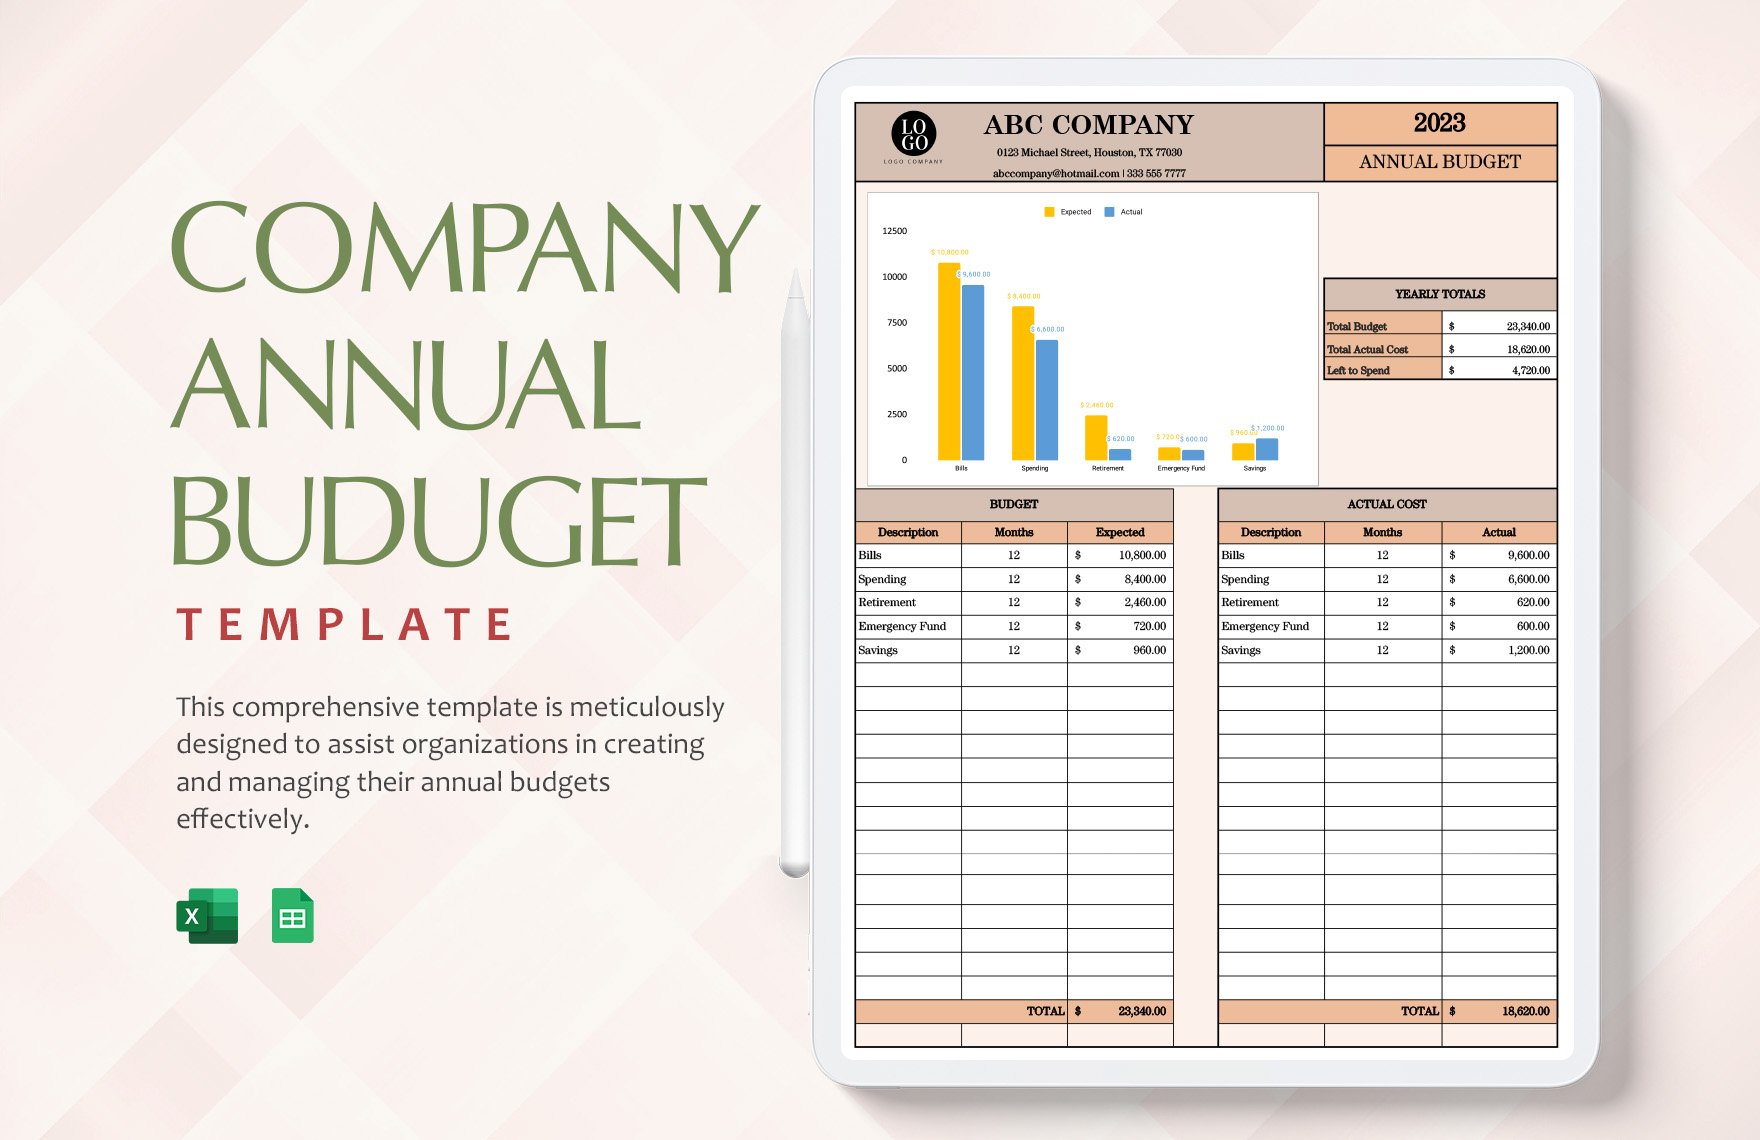 Company Annual Budget in Excel, Google Sheets